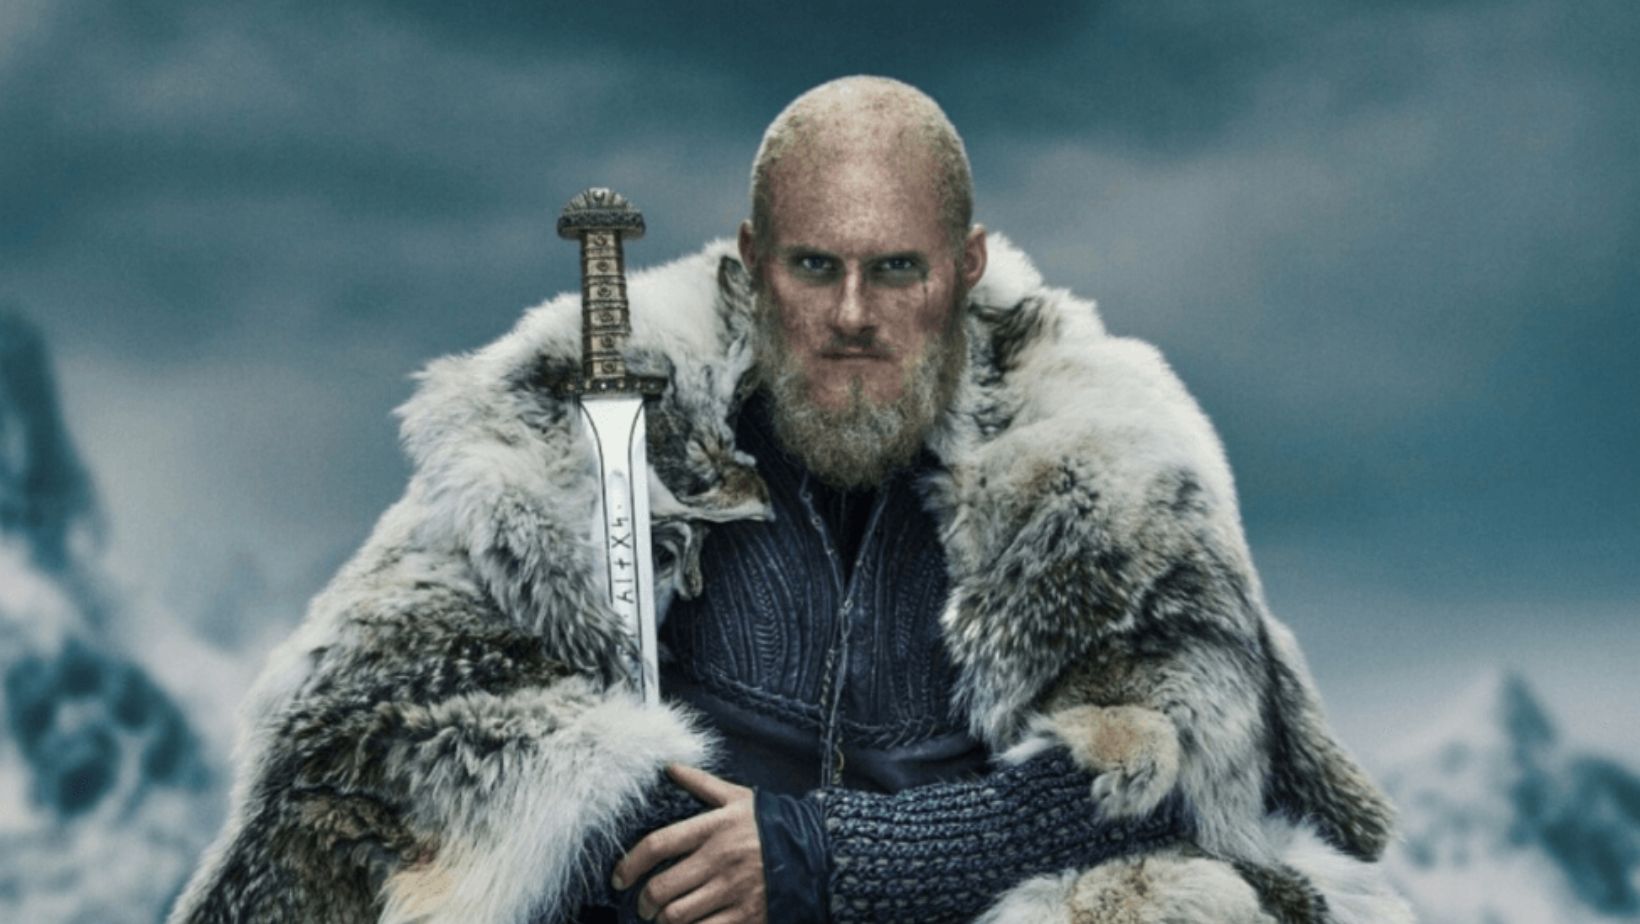 Bjorn Ironside: Viking leader and first king of Sweden